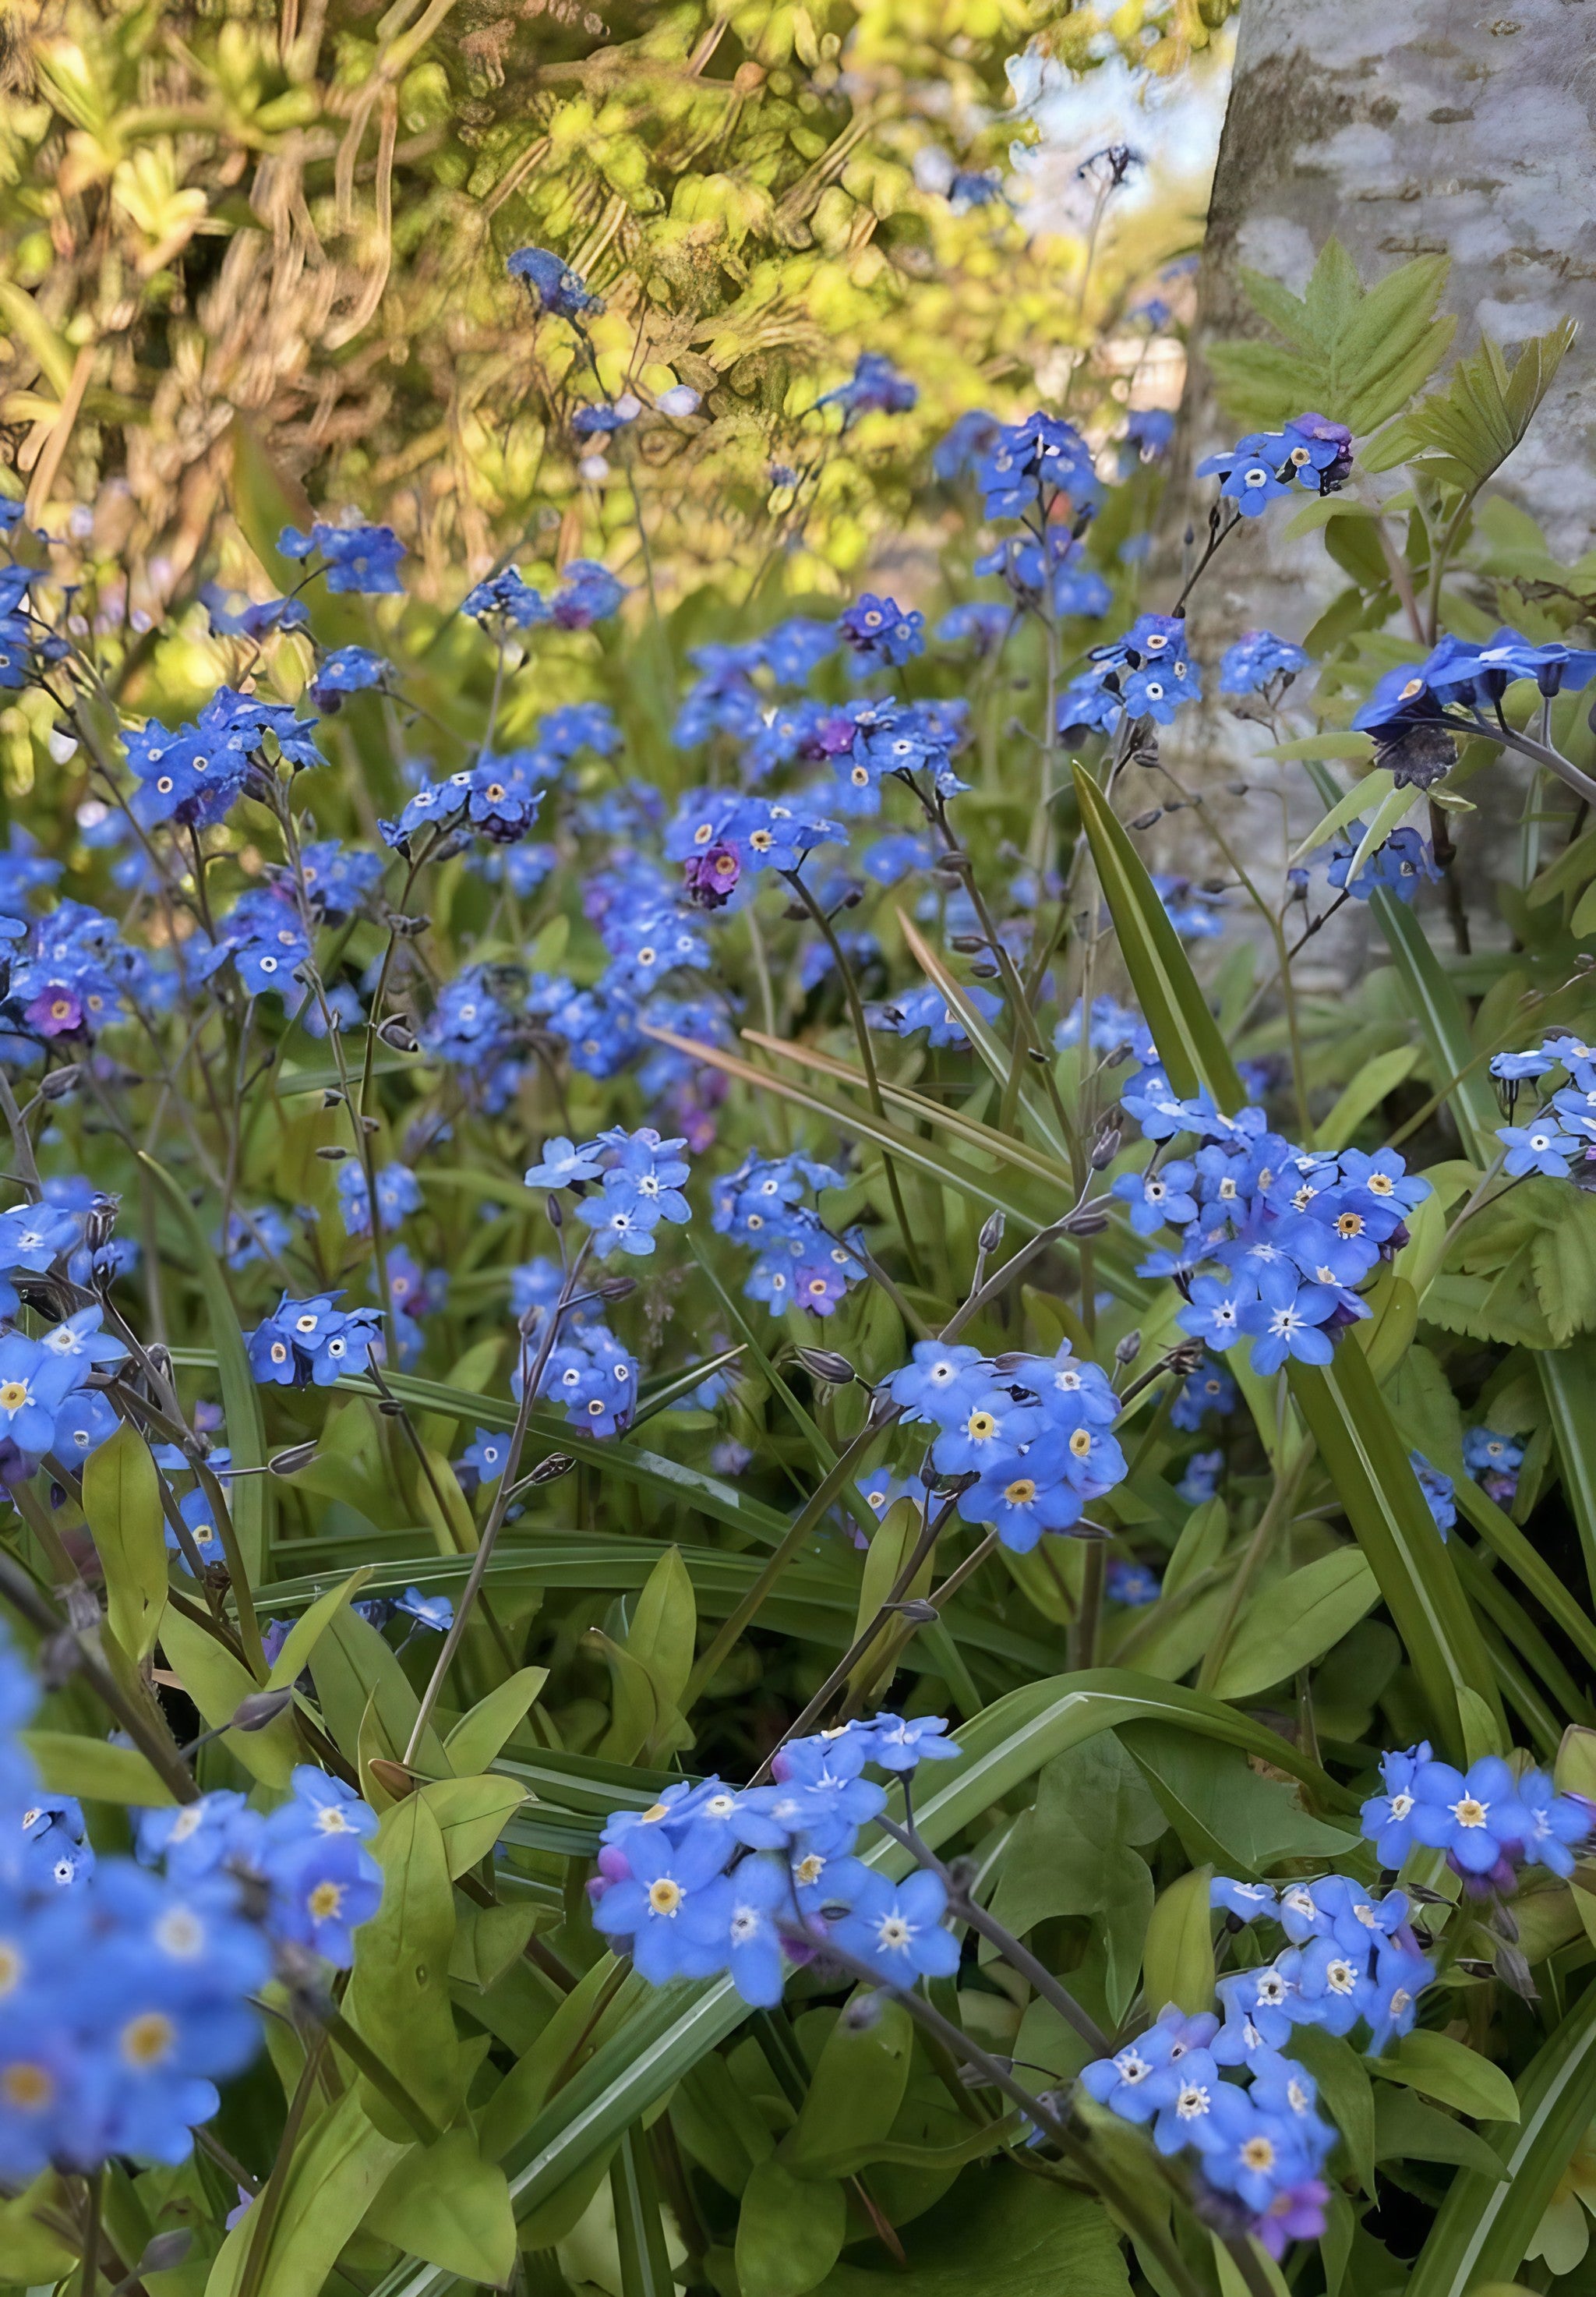 Forget-me-not (Blue) blossoms in full bloom